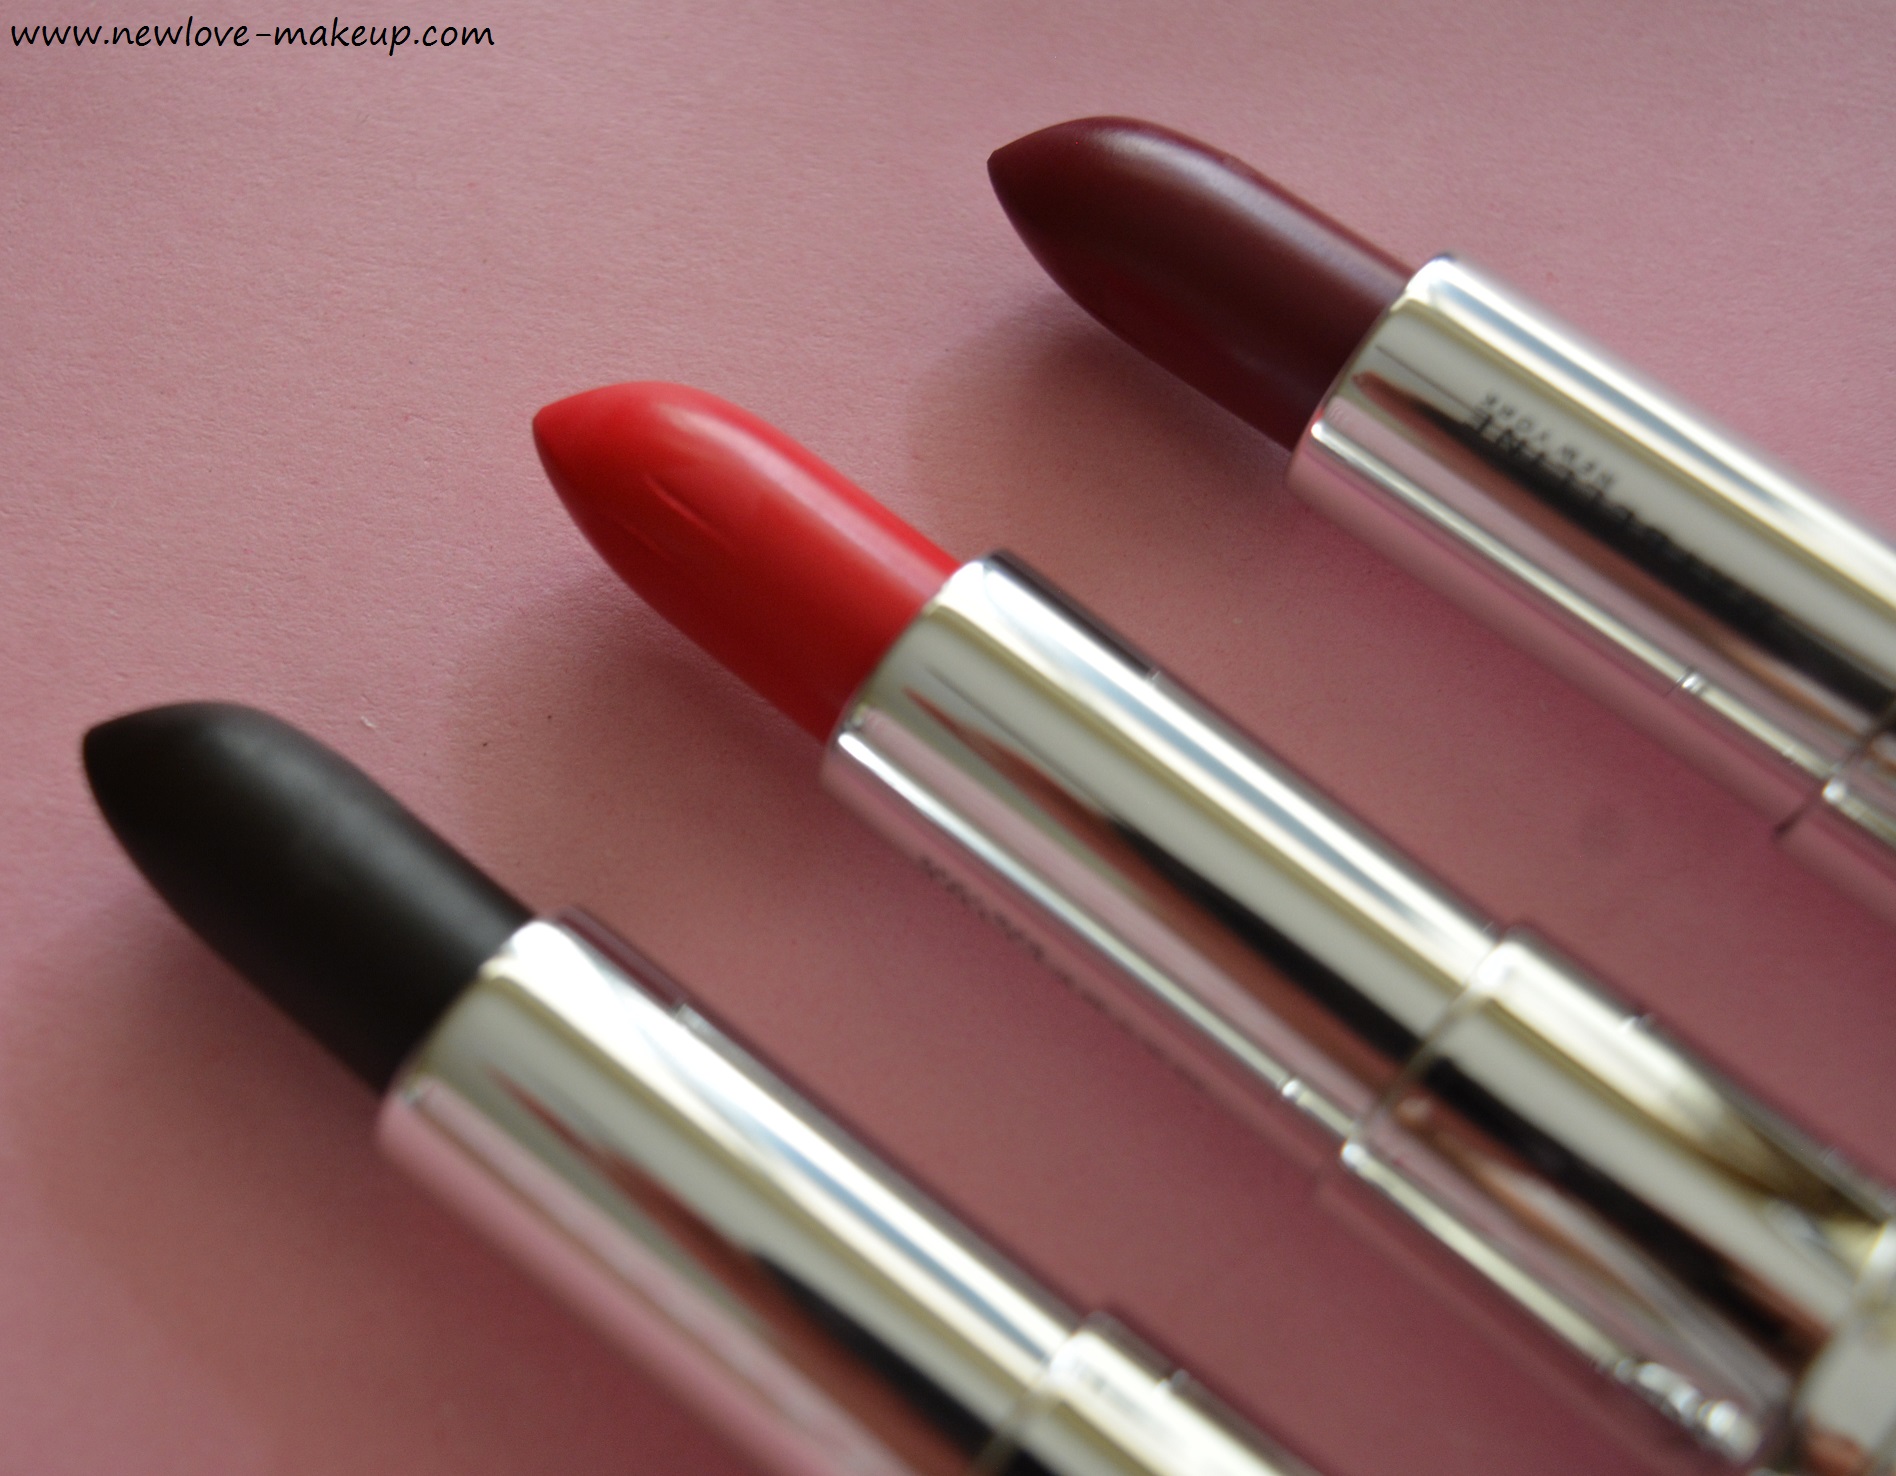 Maybelline The Loaded Bolds Lipsticks Review, Swatches